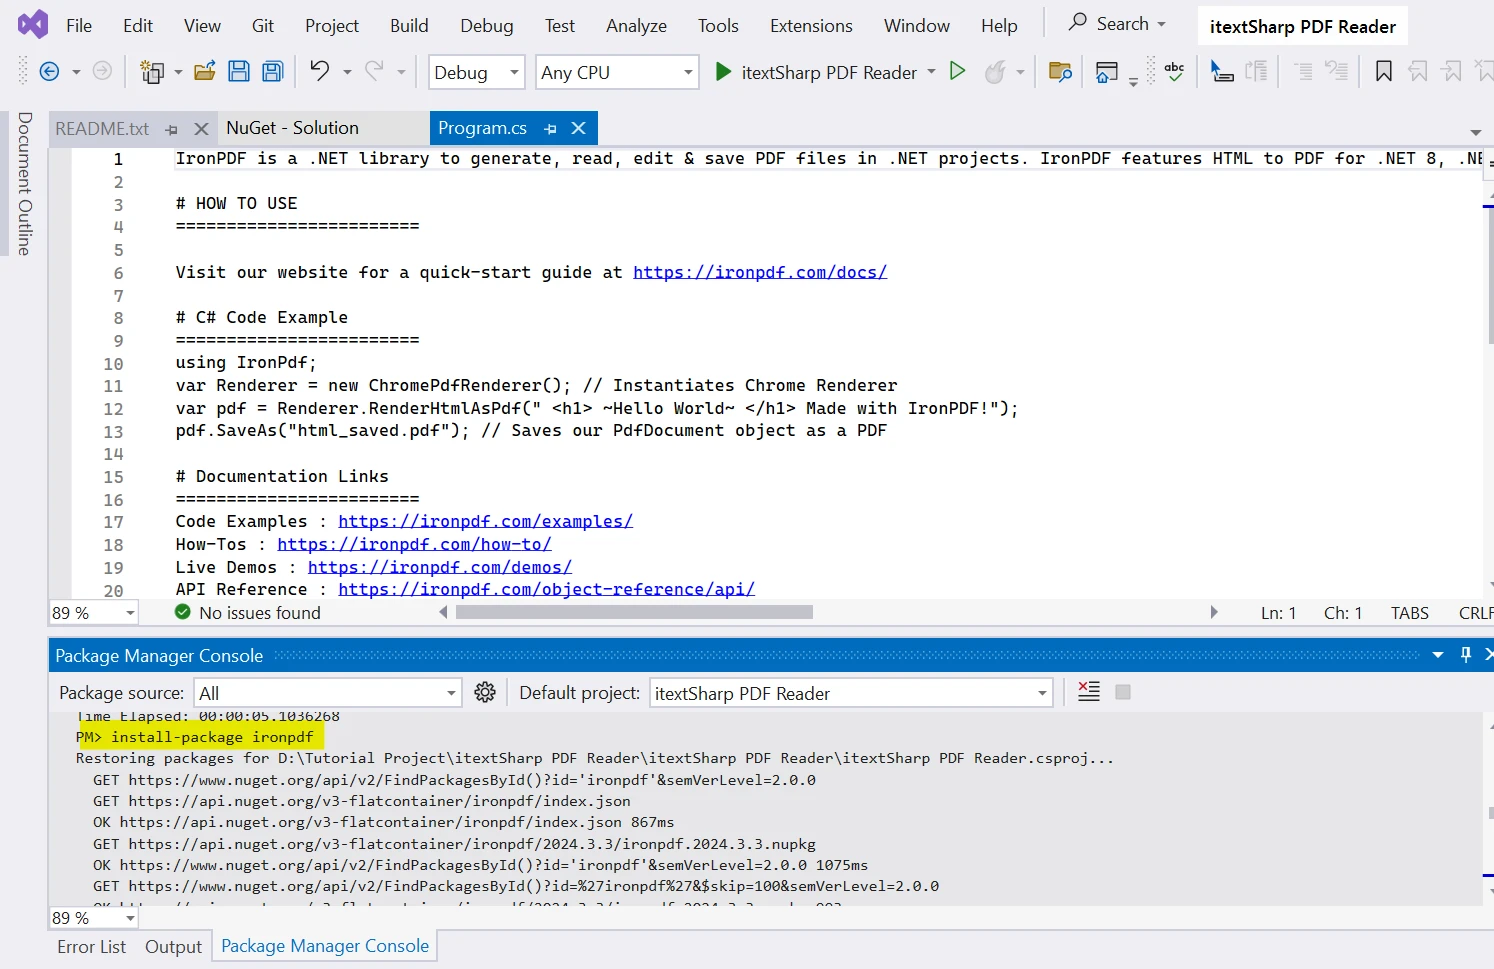 How to Read PDF Documents in C# using iTextSharp:: Figure 4 - Install IronPDF library using the NuGet Package Manager Console, enter the following command: "Install-package IronPDF"